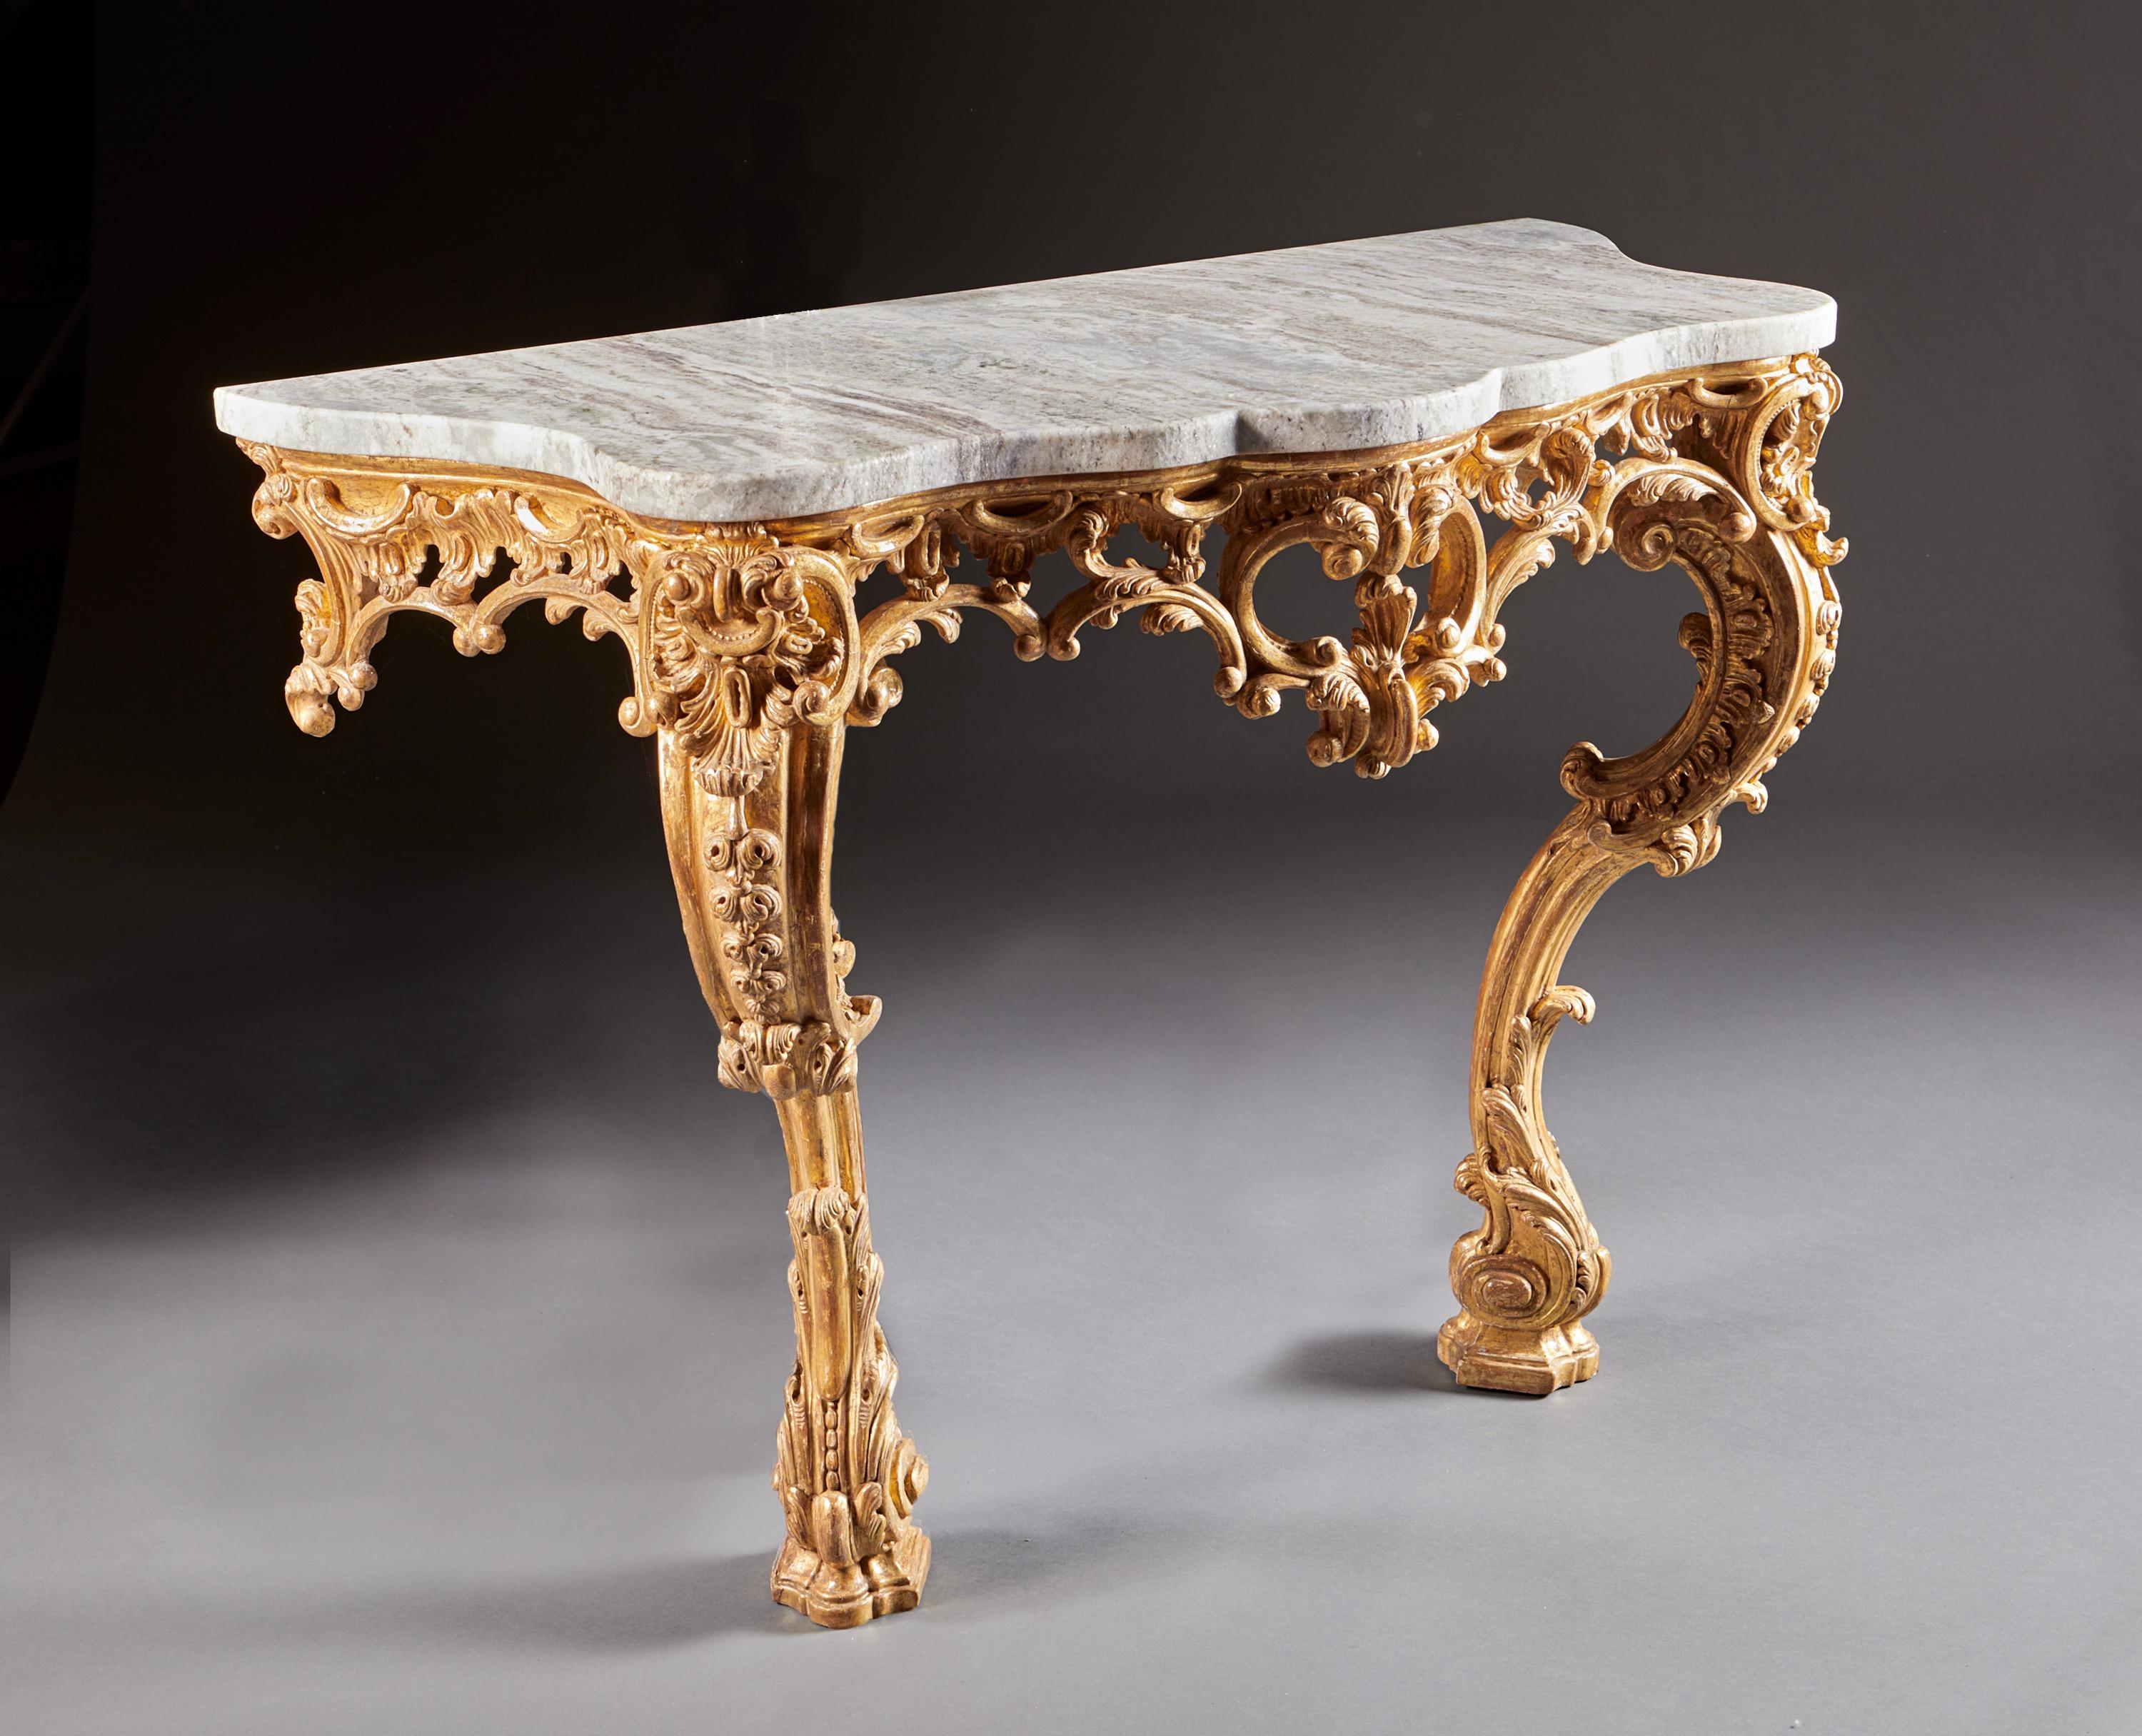 Marble Exceptional English George III Period Carved and Gilded Rococo Console Table For Sale